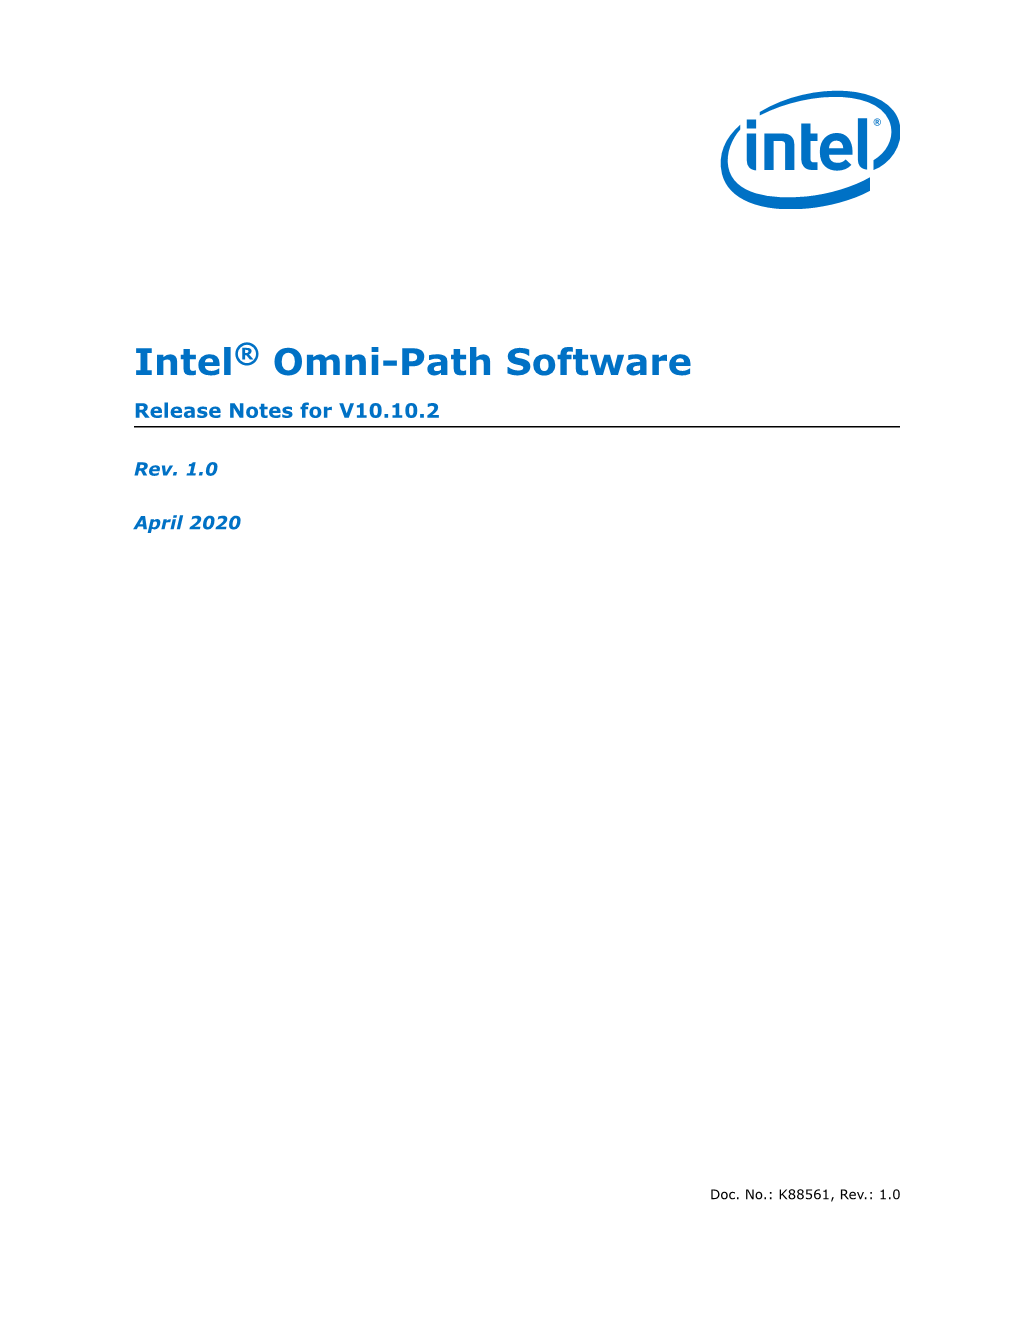 Intel® Omni-Path Software — Release Notes for V10.10.2